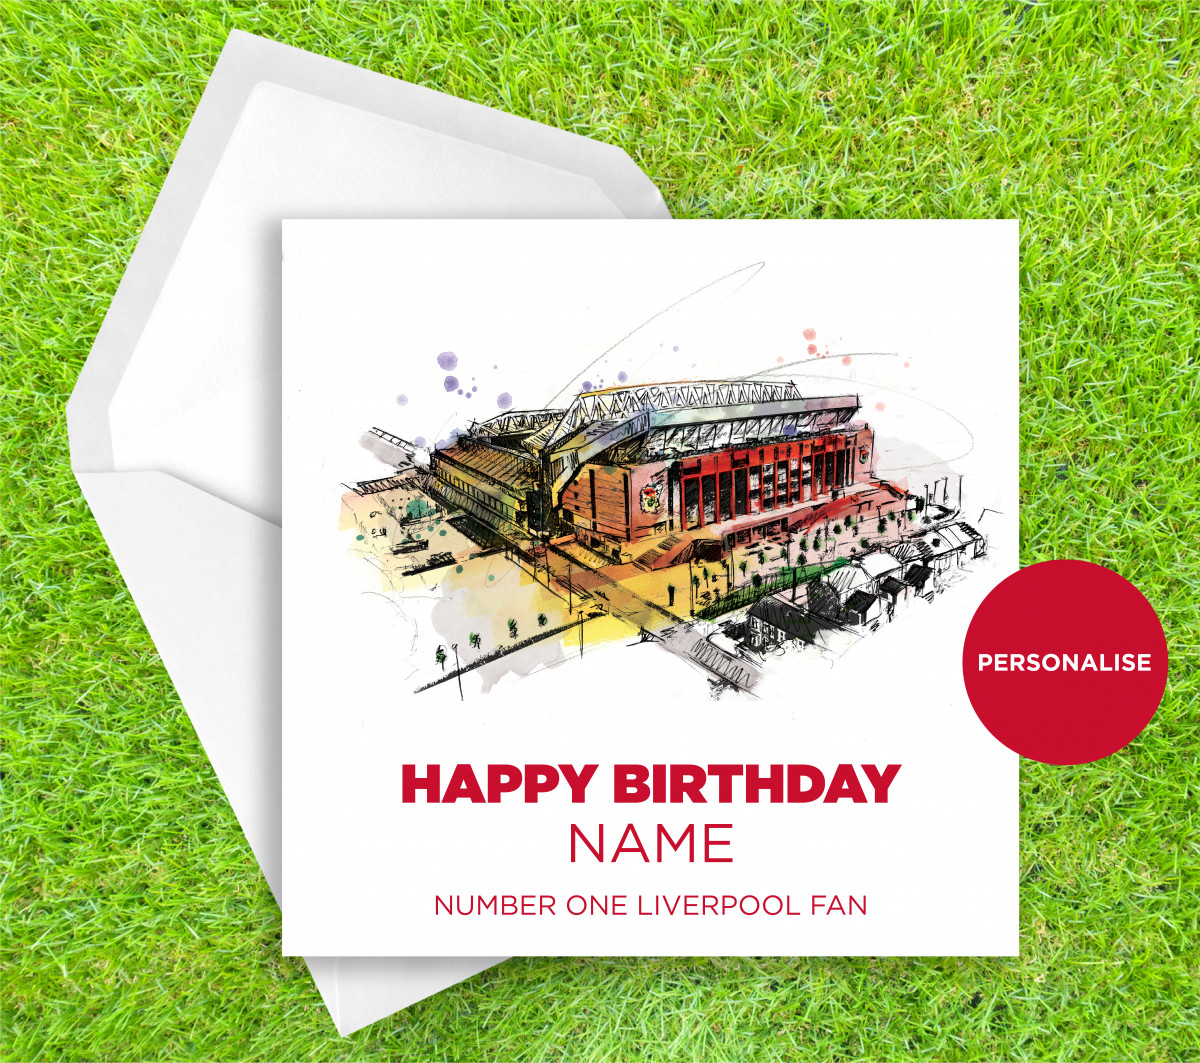 Liverpool FC, Anfield, personalised birthday card